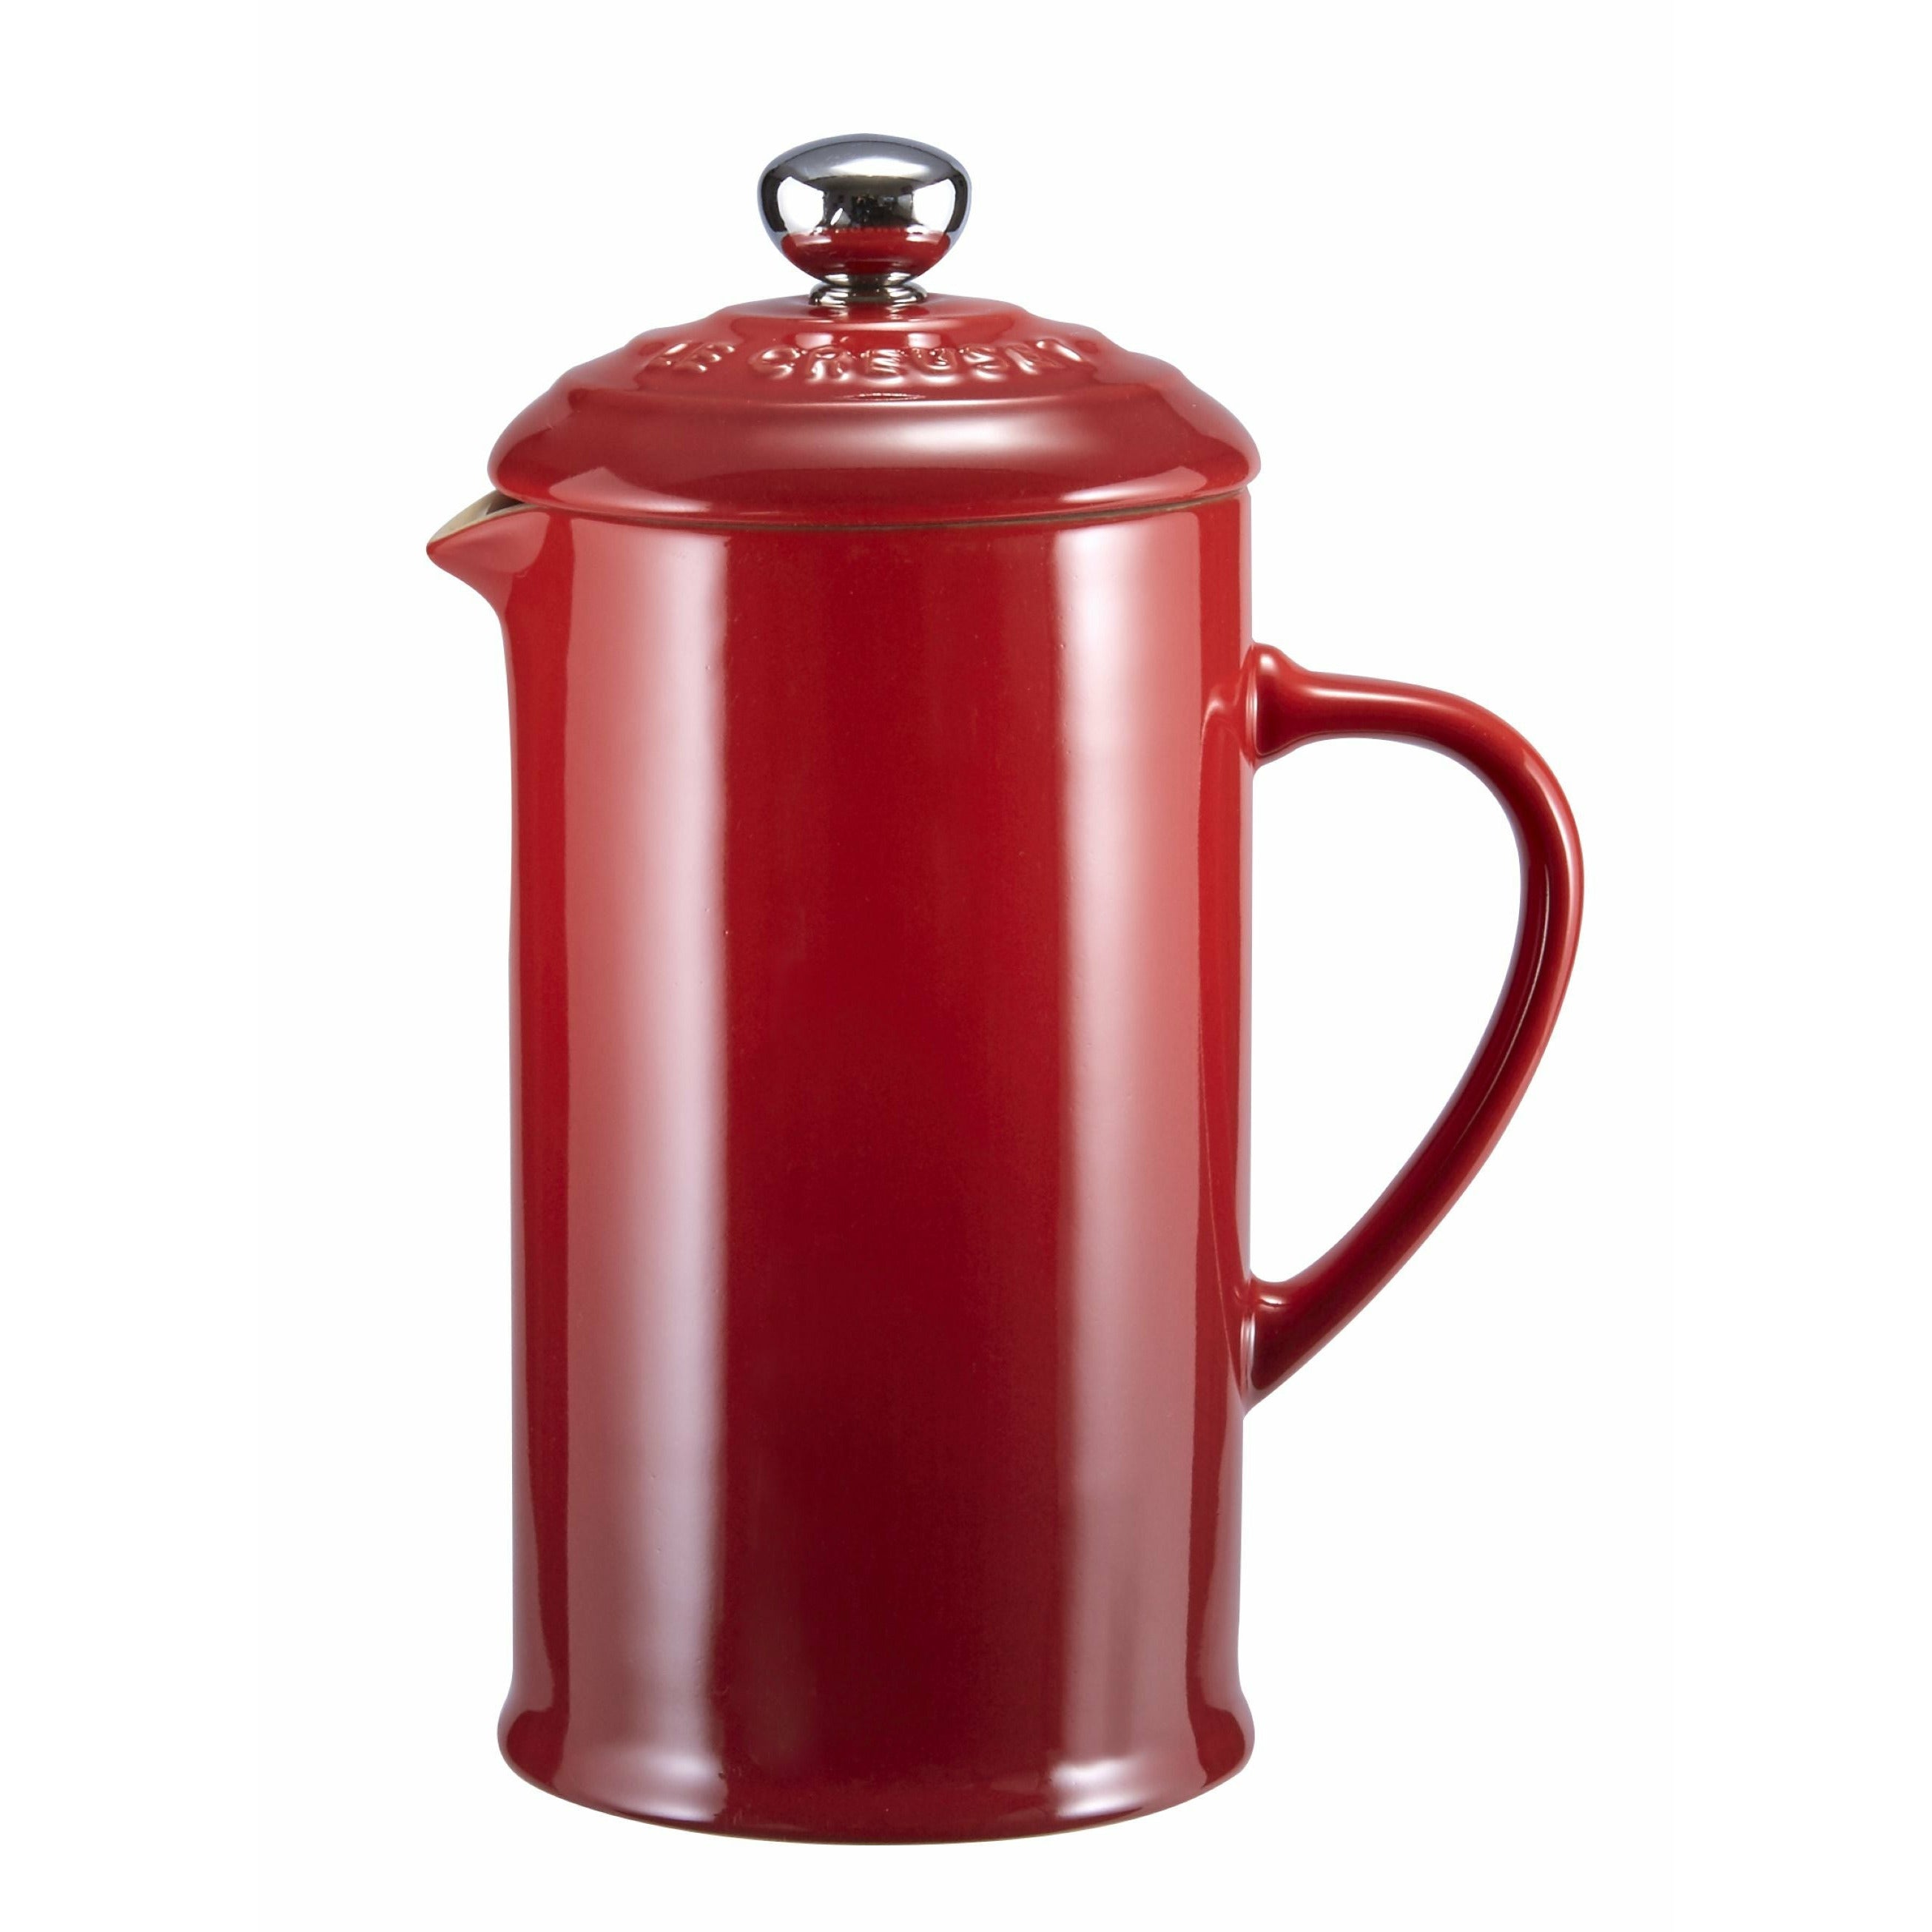 Le Creuset Cafetera 1 L, Cherry Red